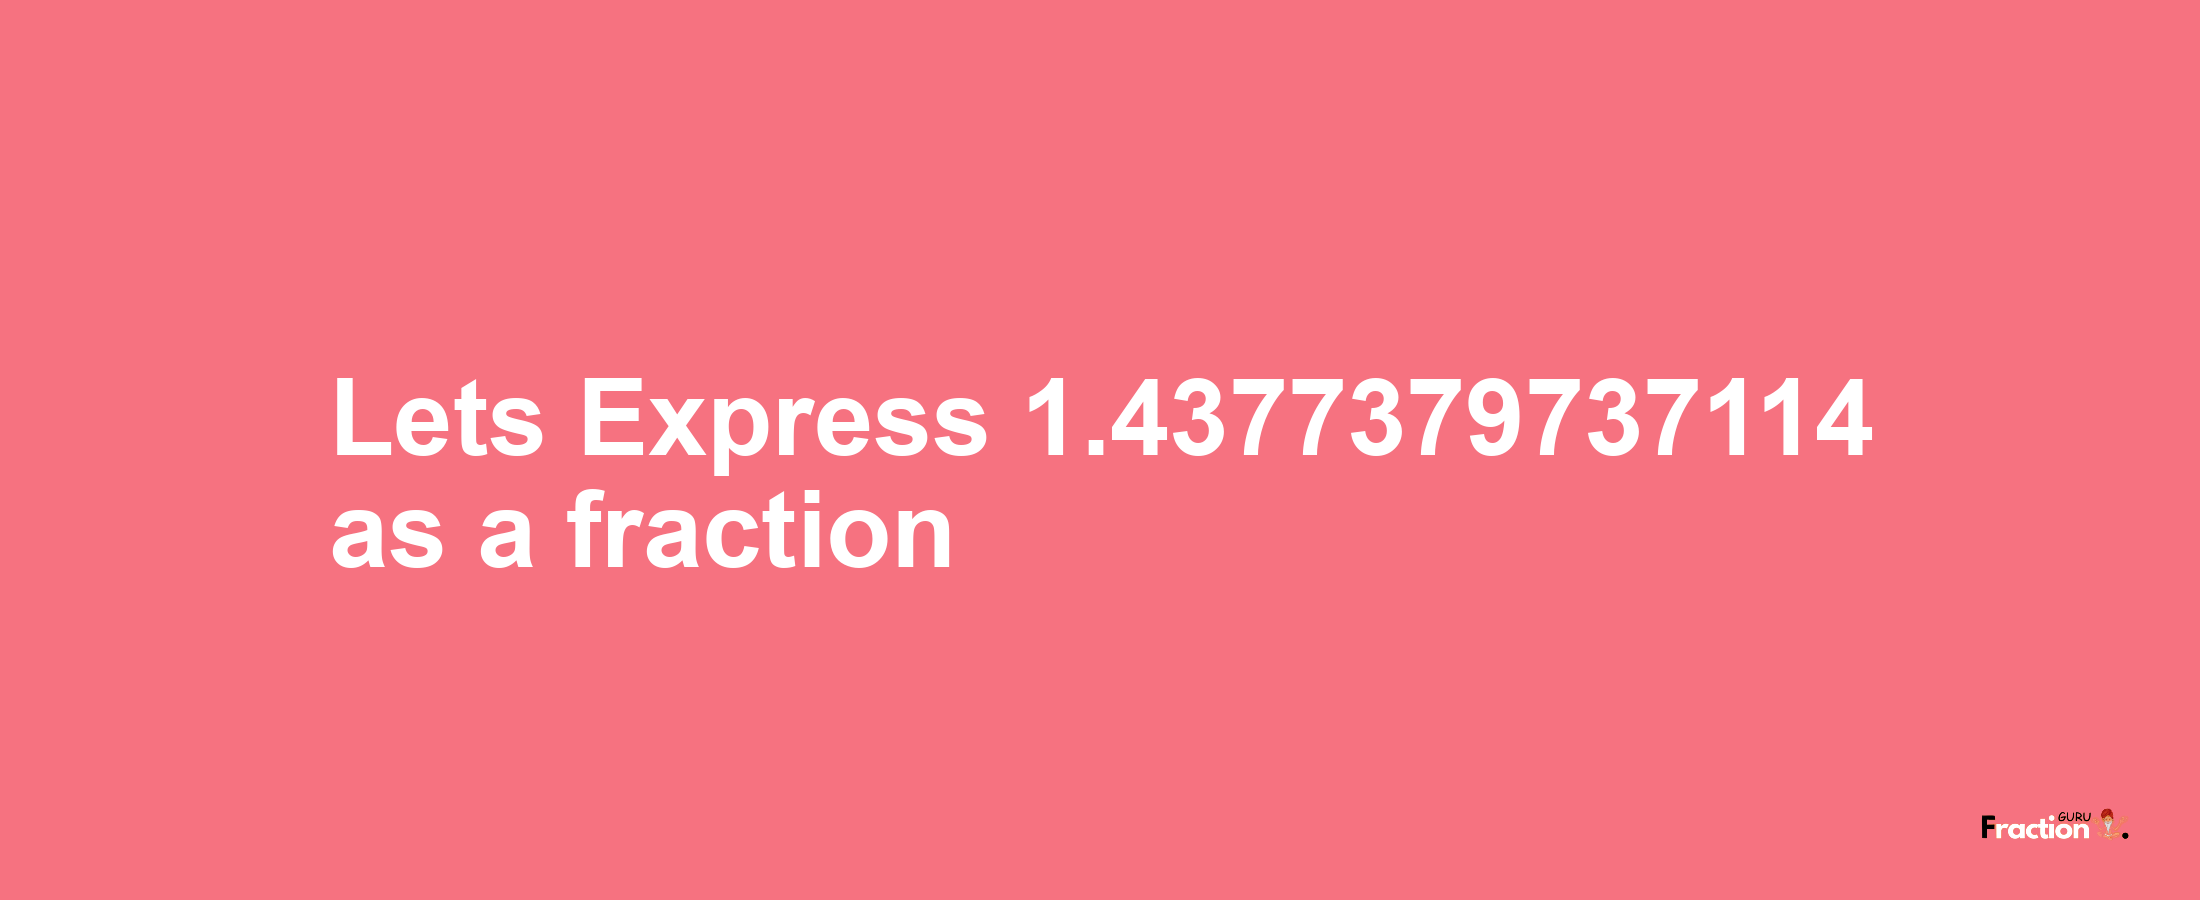 Lets Express 1.4377379737114 as afraction